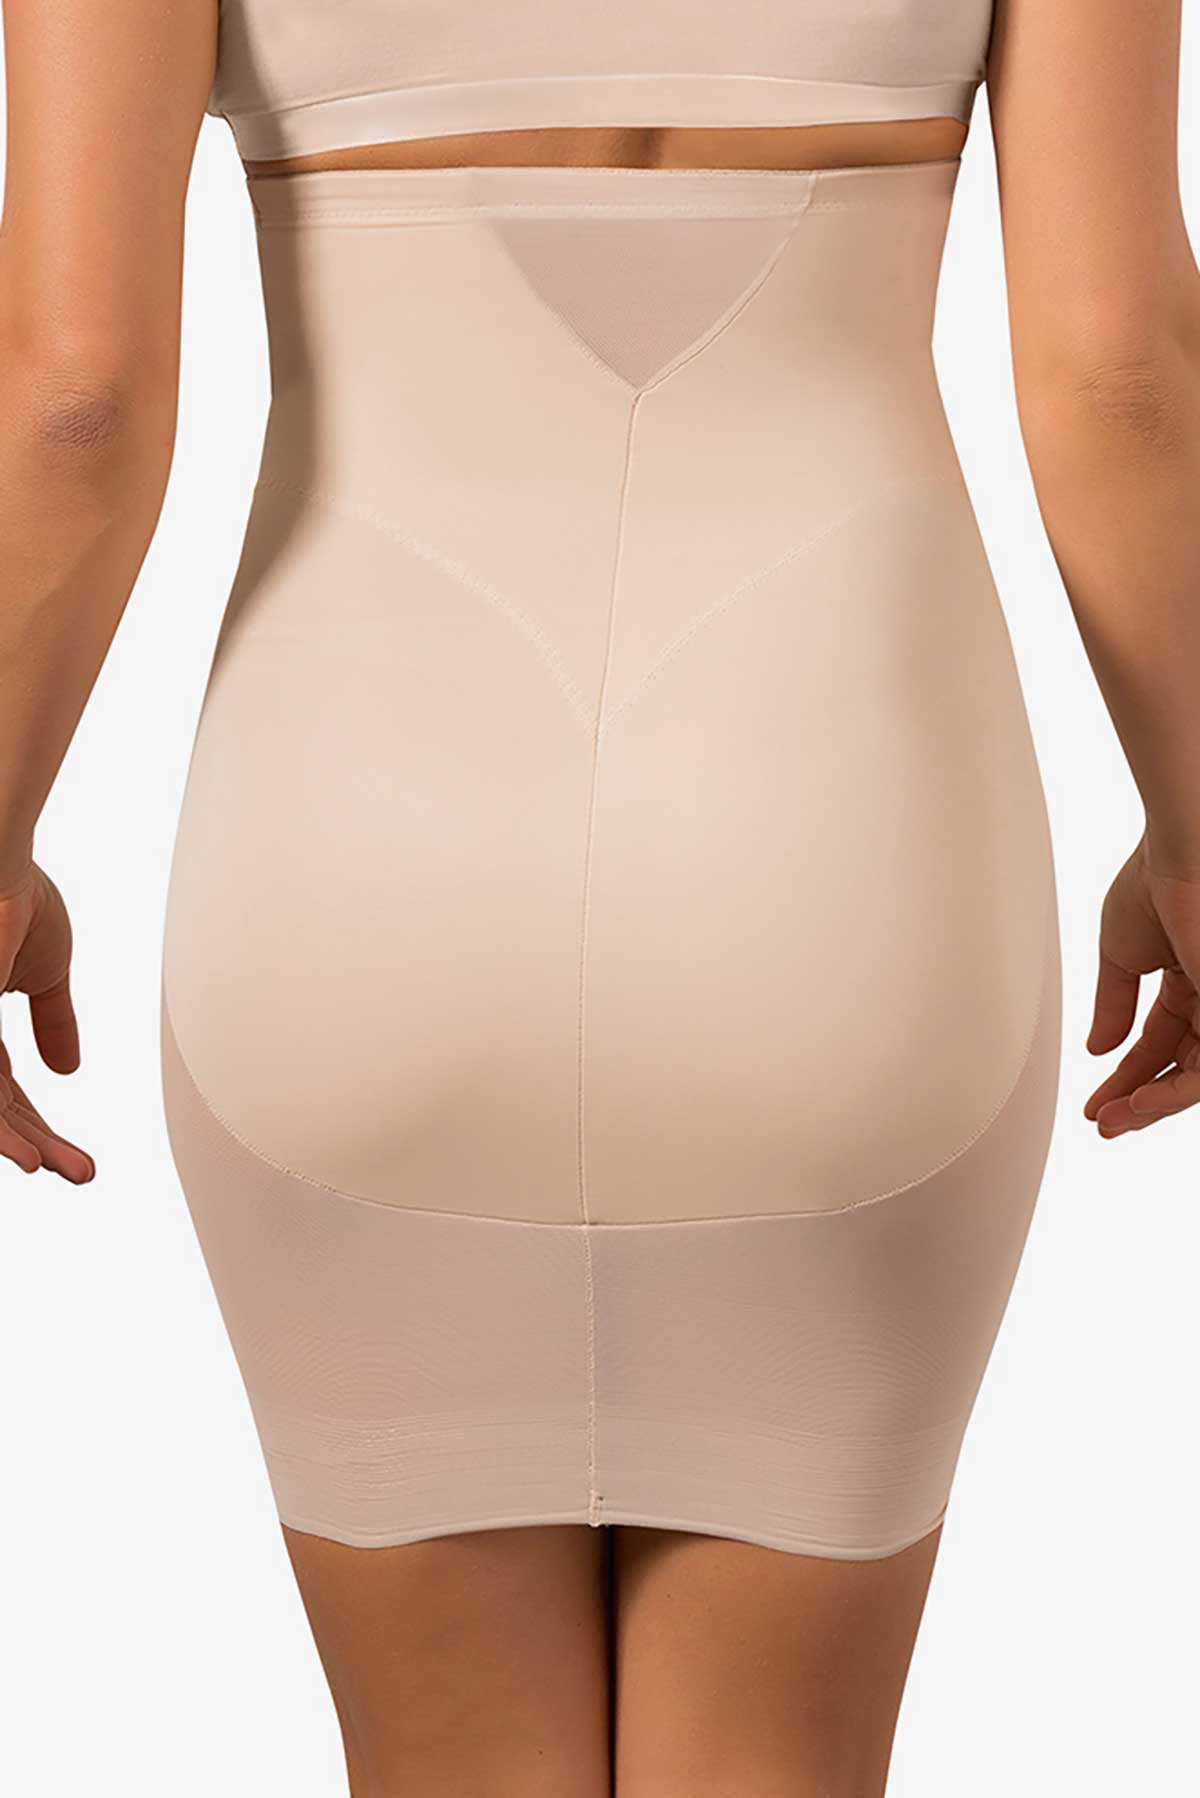 OZSALE  Miraclesuit Shapewear Tummy Tuck Firm Control Ultra High